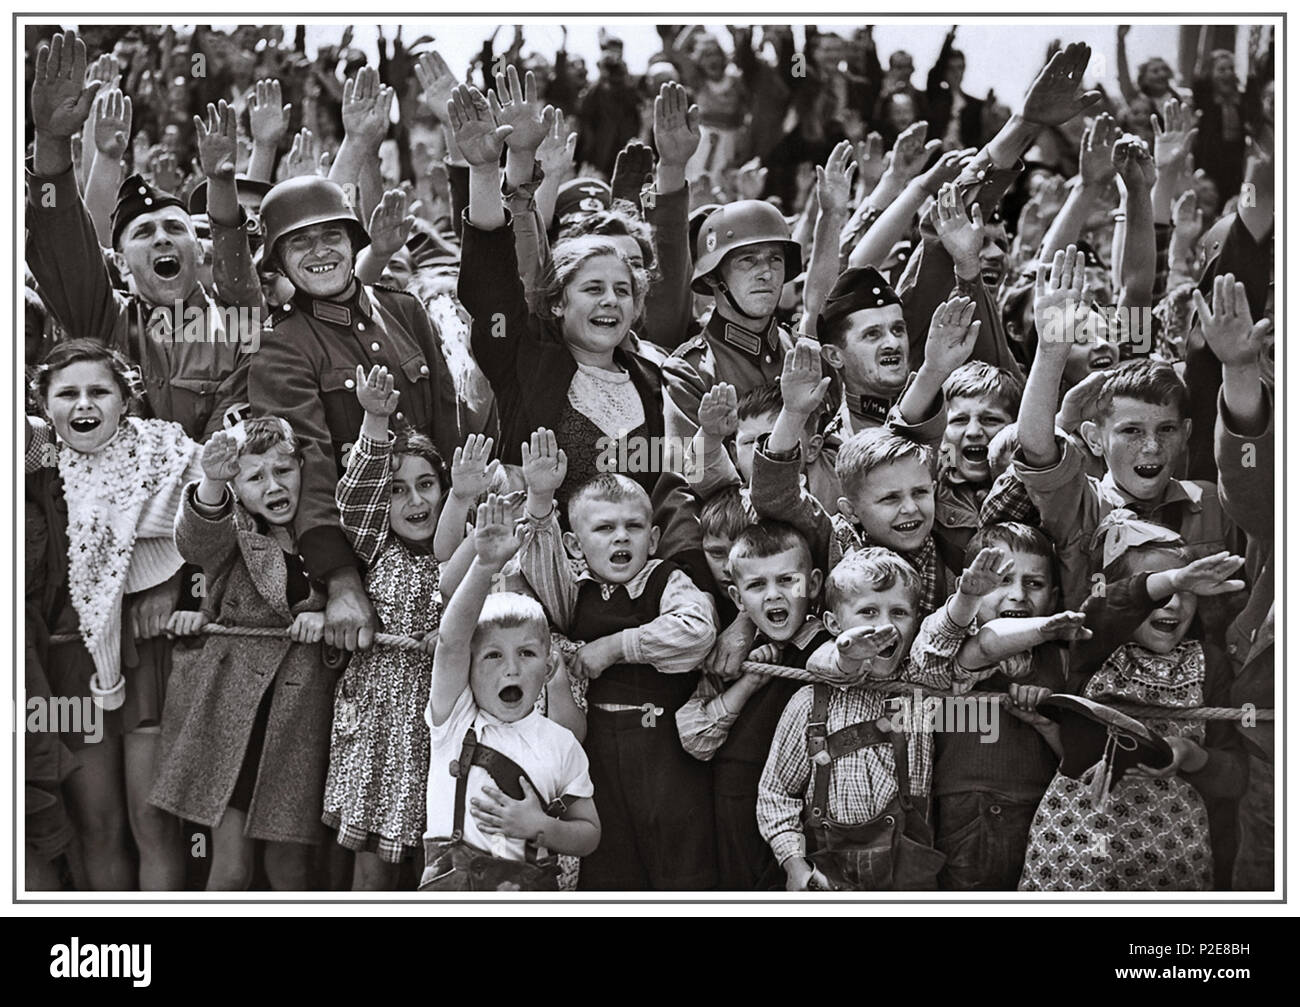 1930’s Adolf Hitler attracting an ecstatic crowd of all ages giving him the Nazi Seig Heil salute Germany Stock Photo